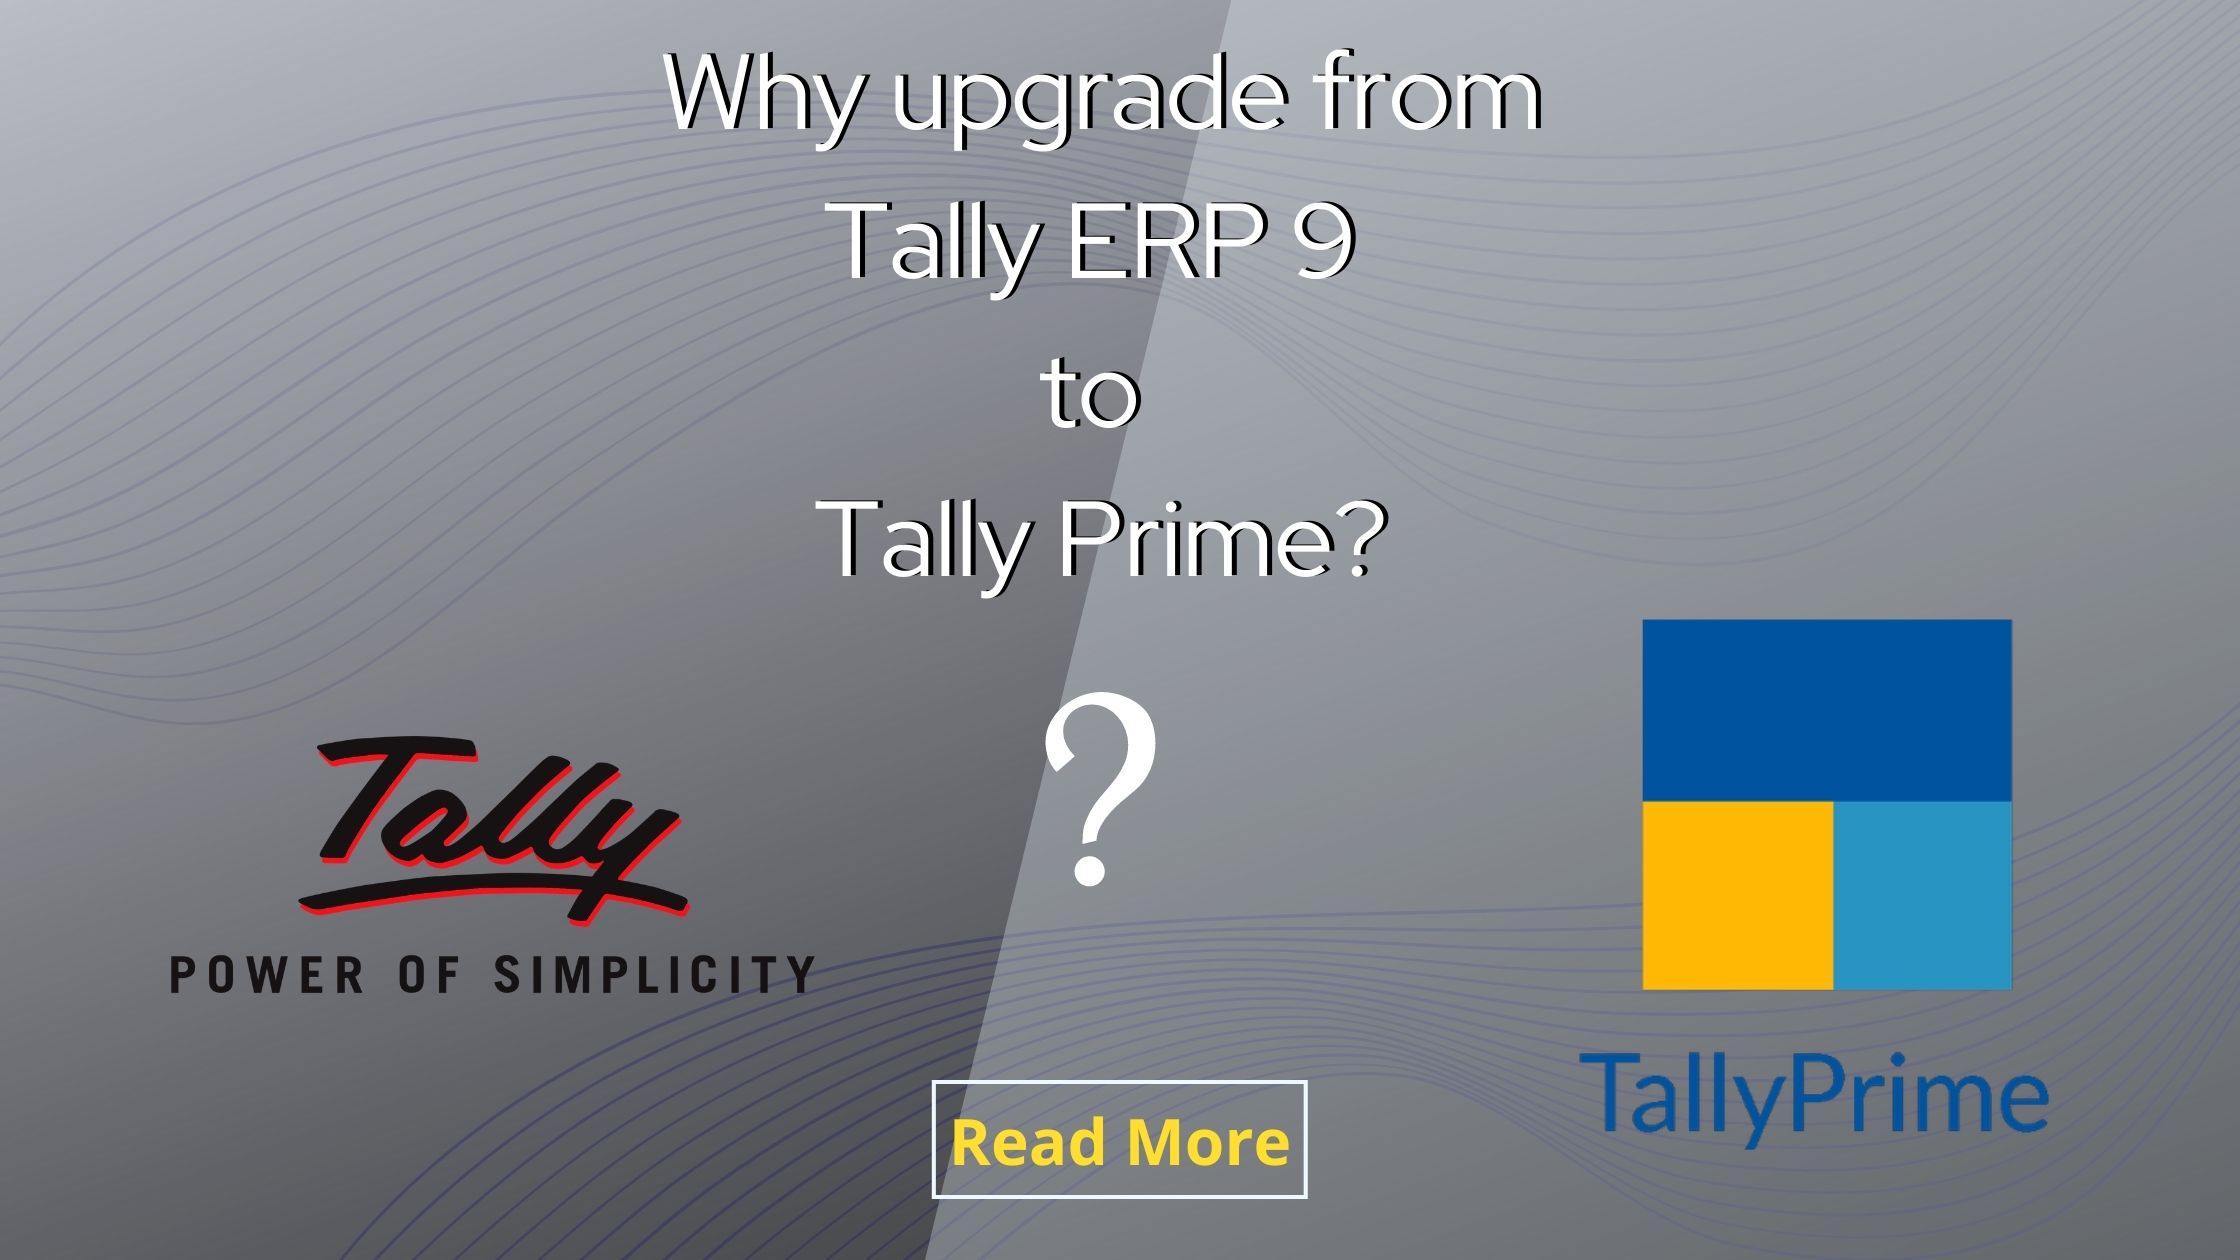 Tally erp on cloud to tally prime on cloud